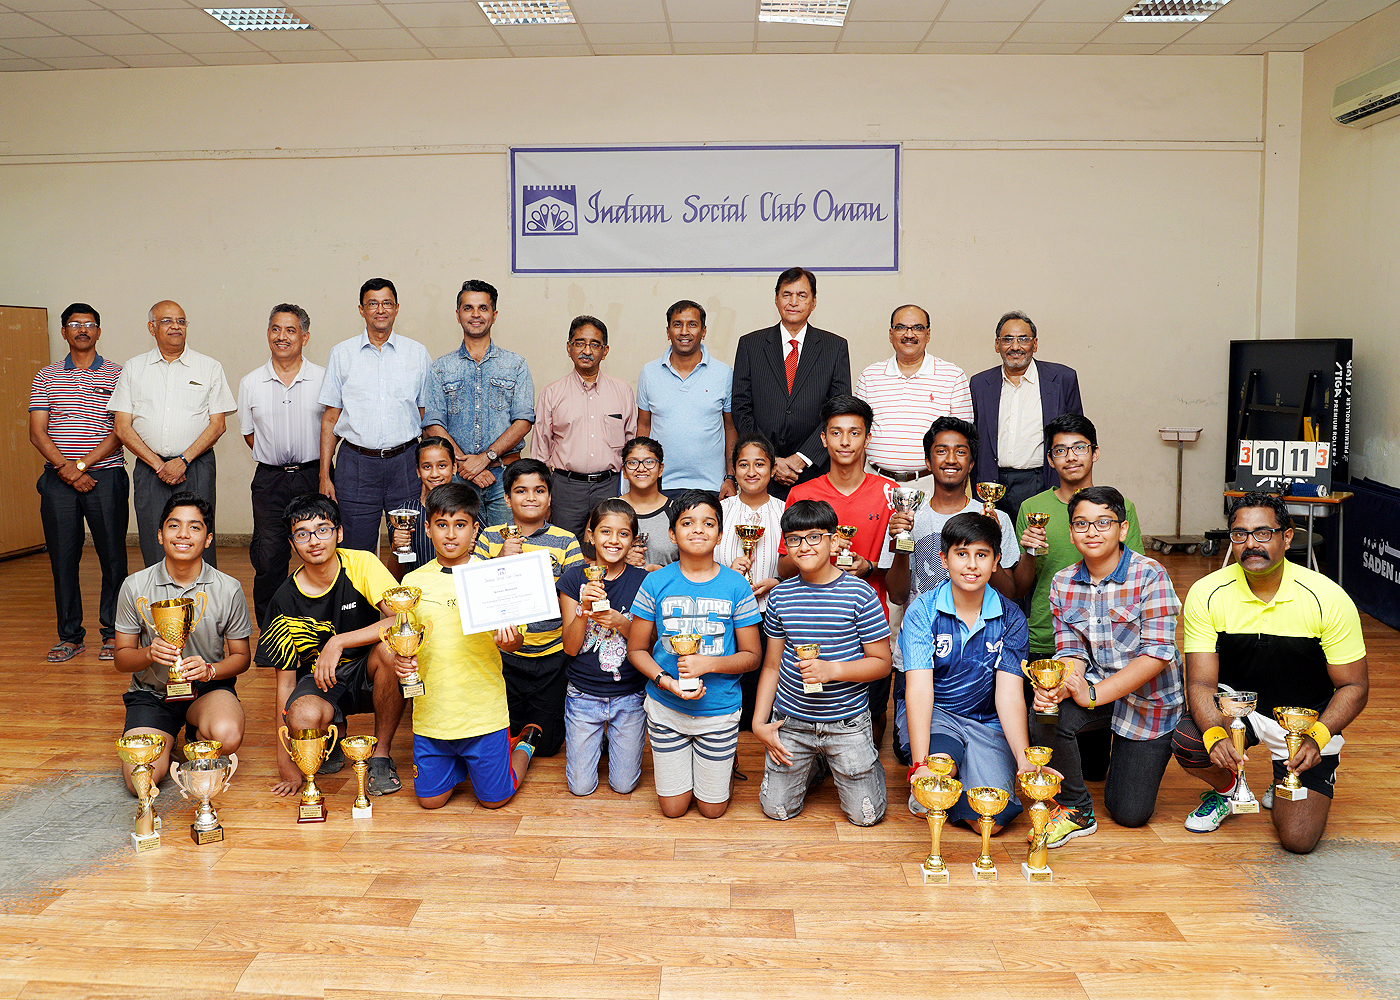 Viren steals the show at the ISC table tennis tournament